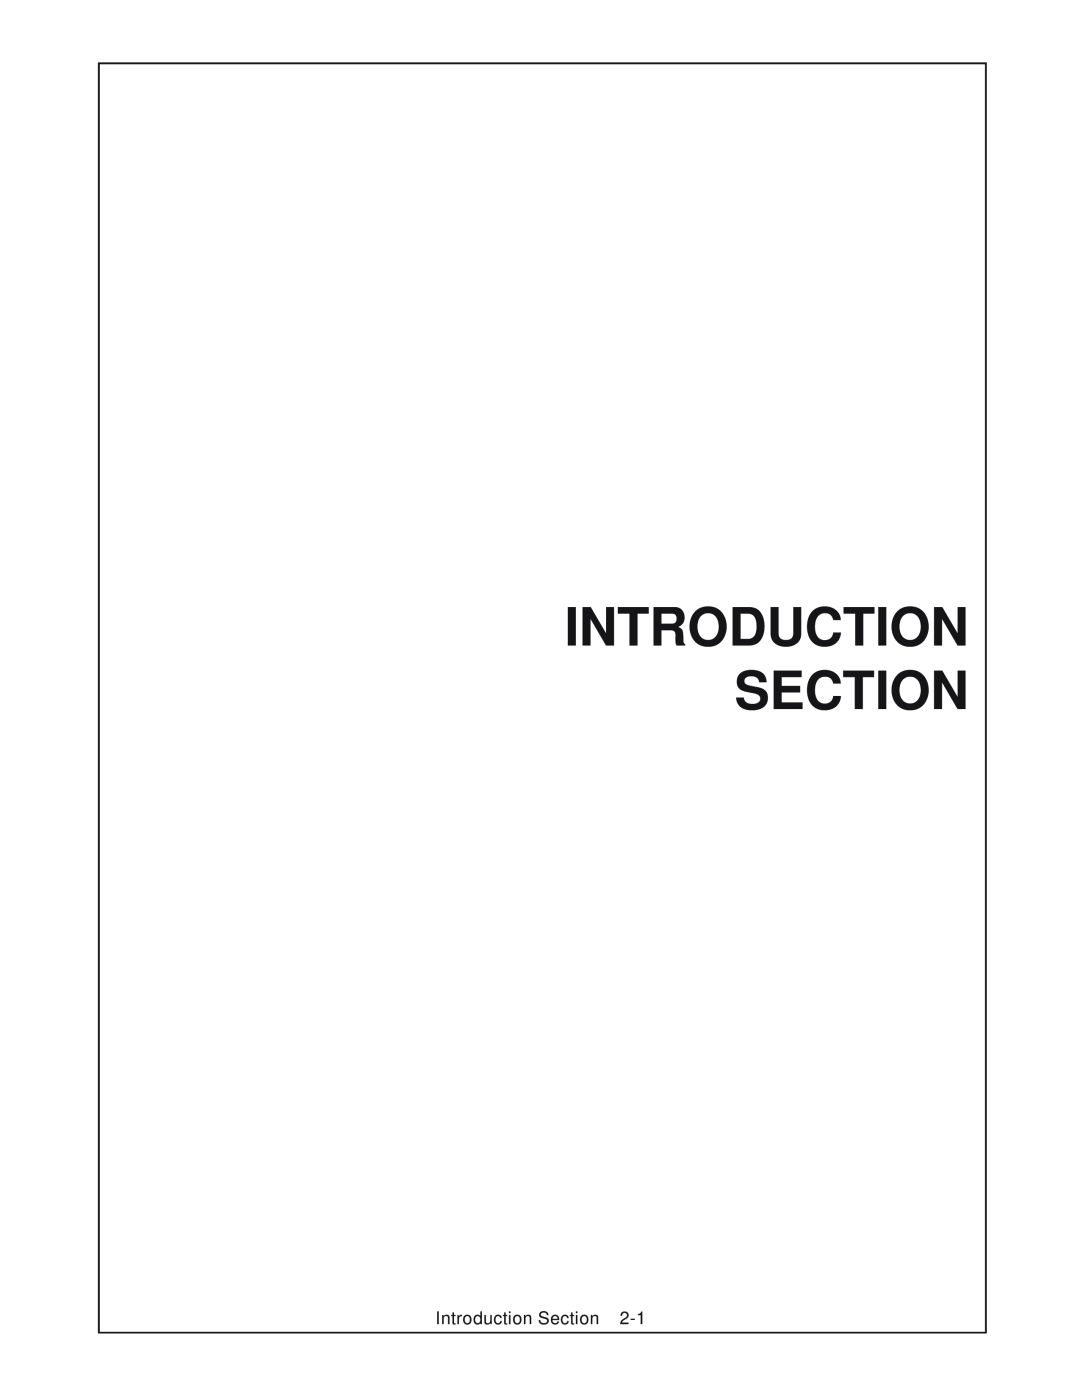 Tiger RBF-19C manual Introduction Section 